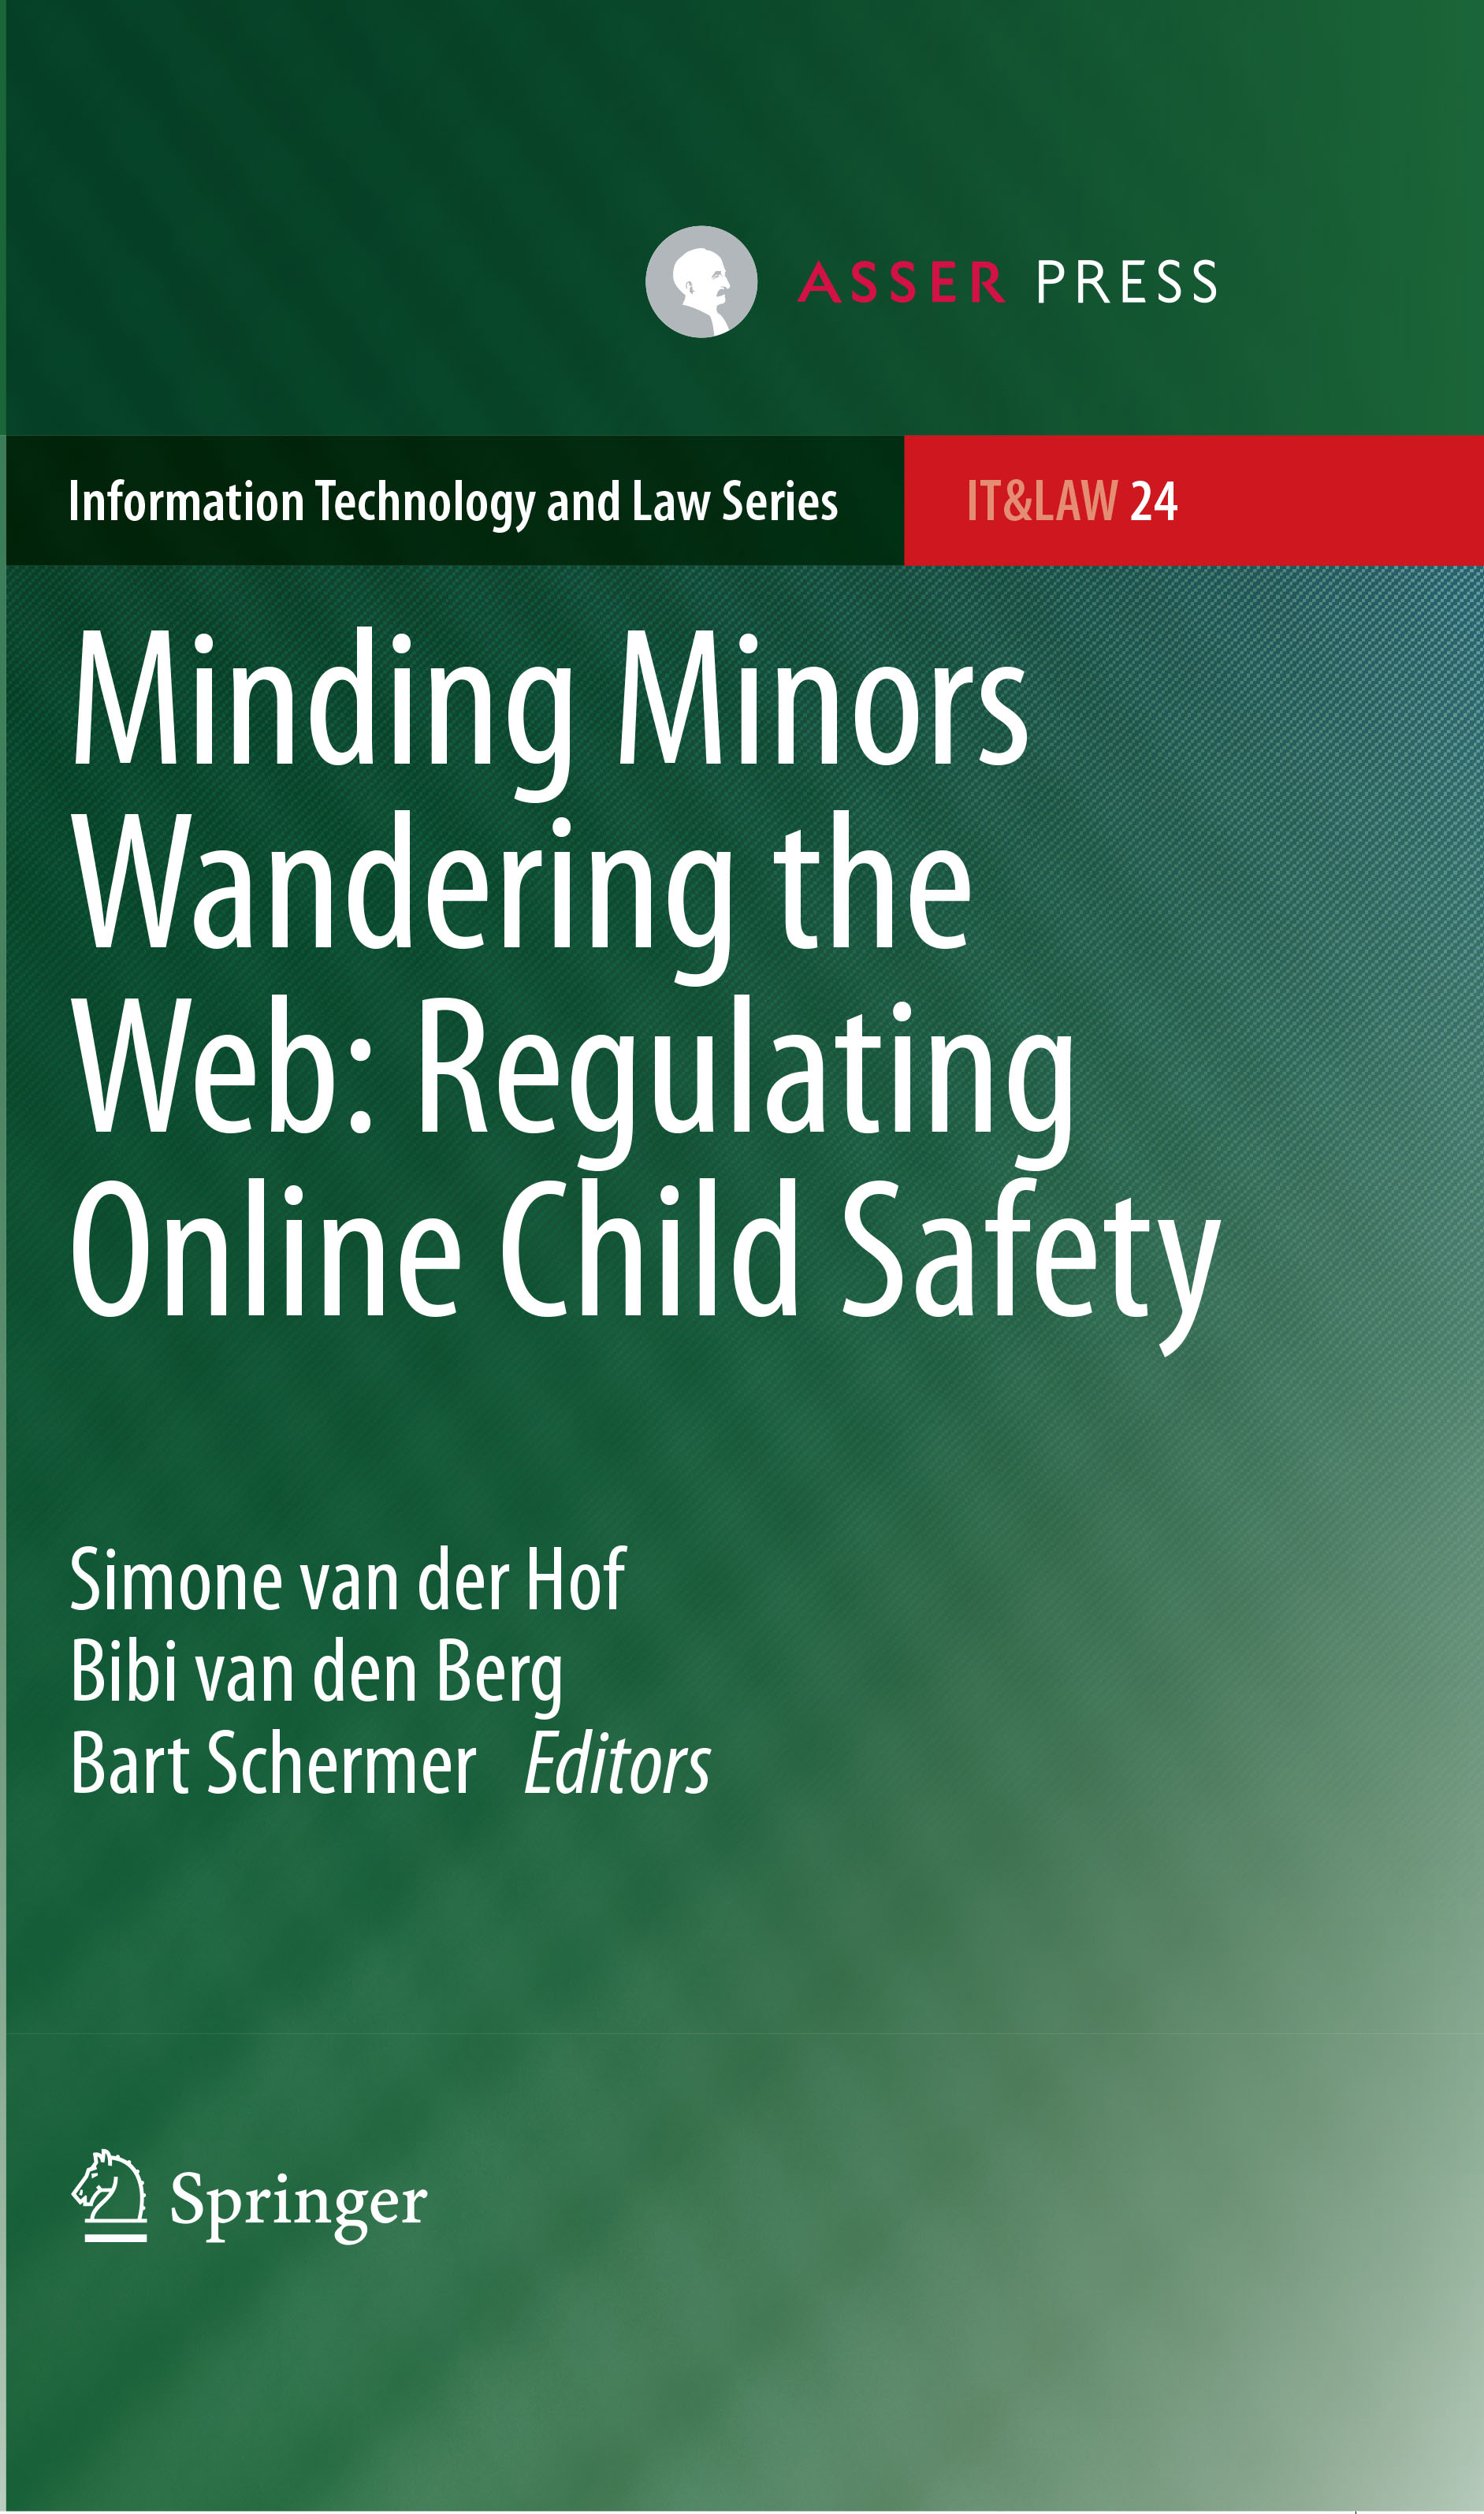 Minding Minors Wandering the Web – Regulating Online Child Safety